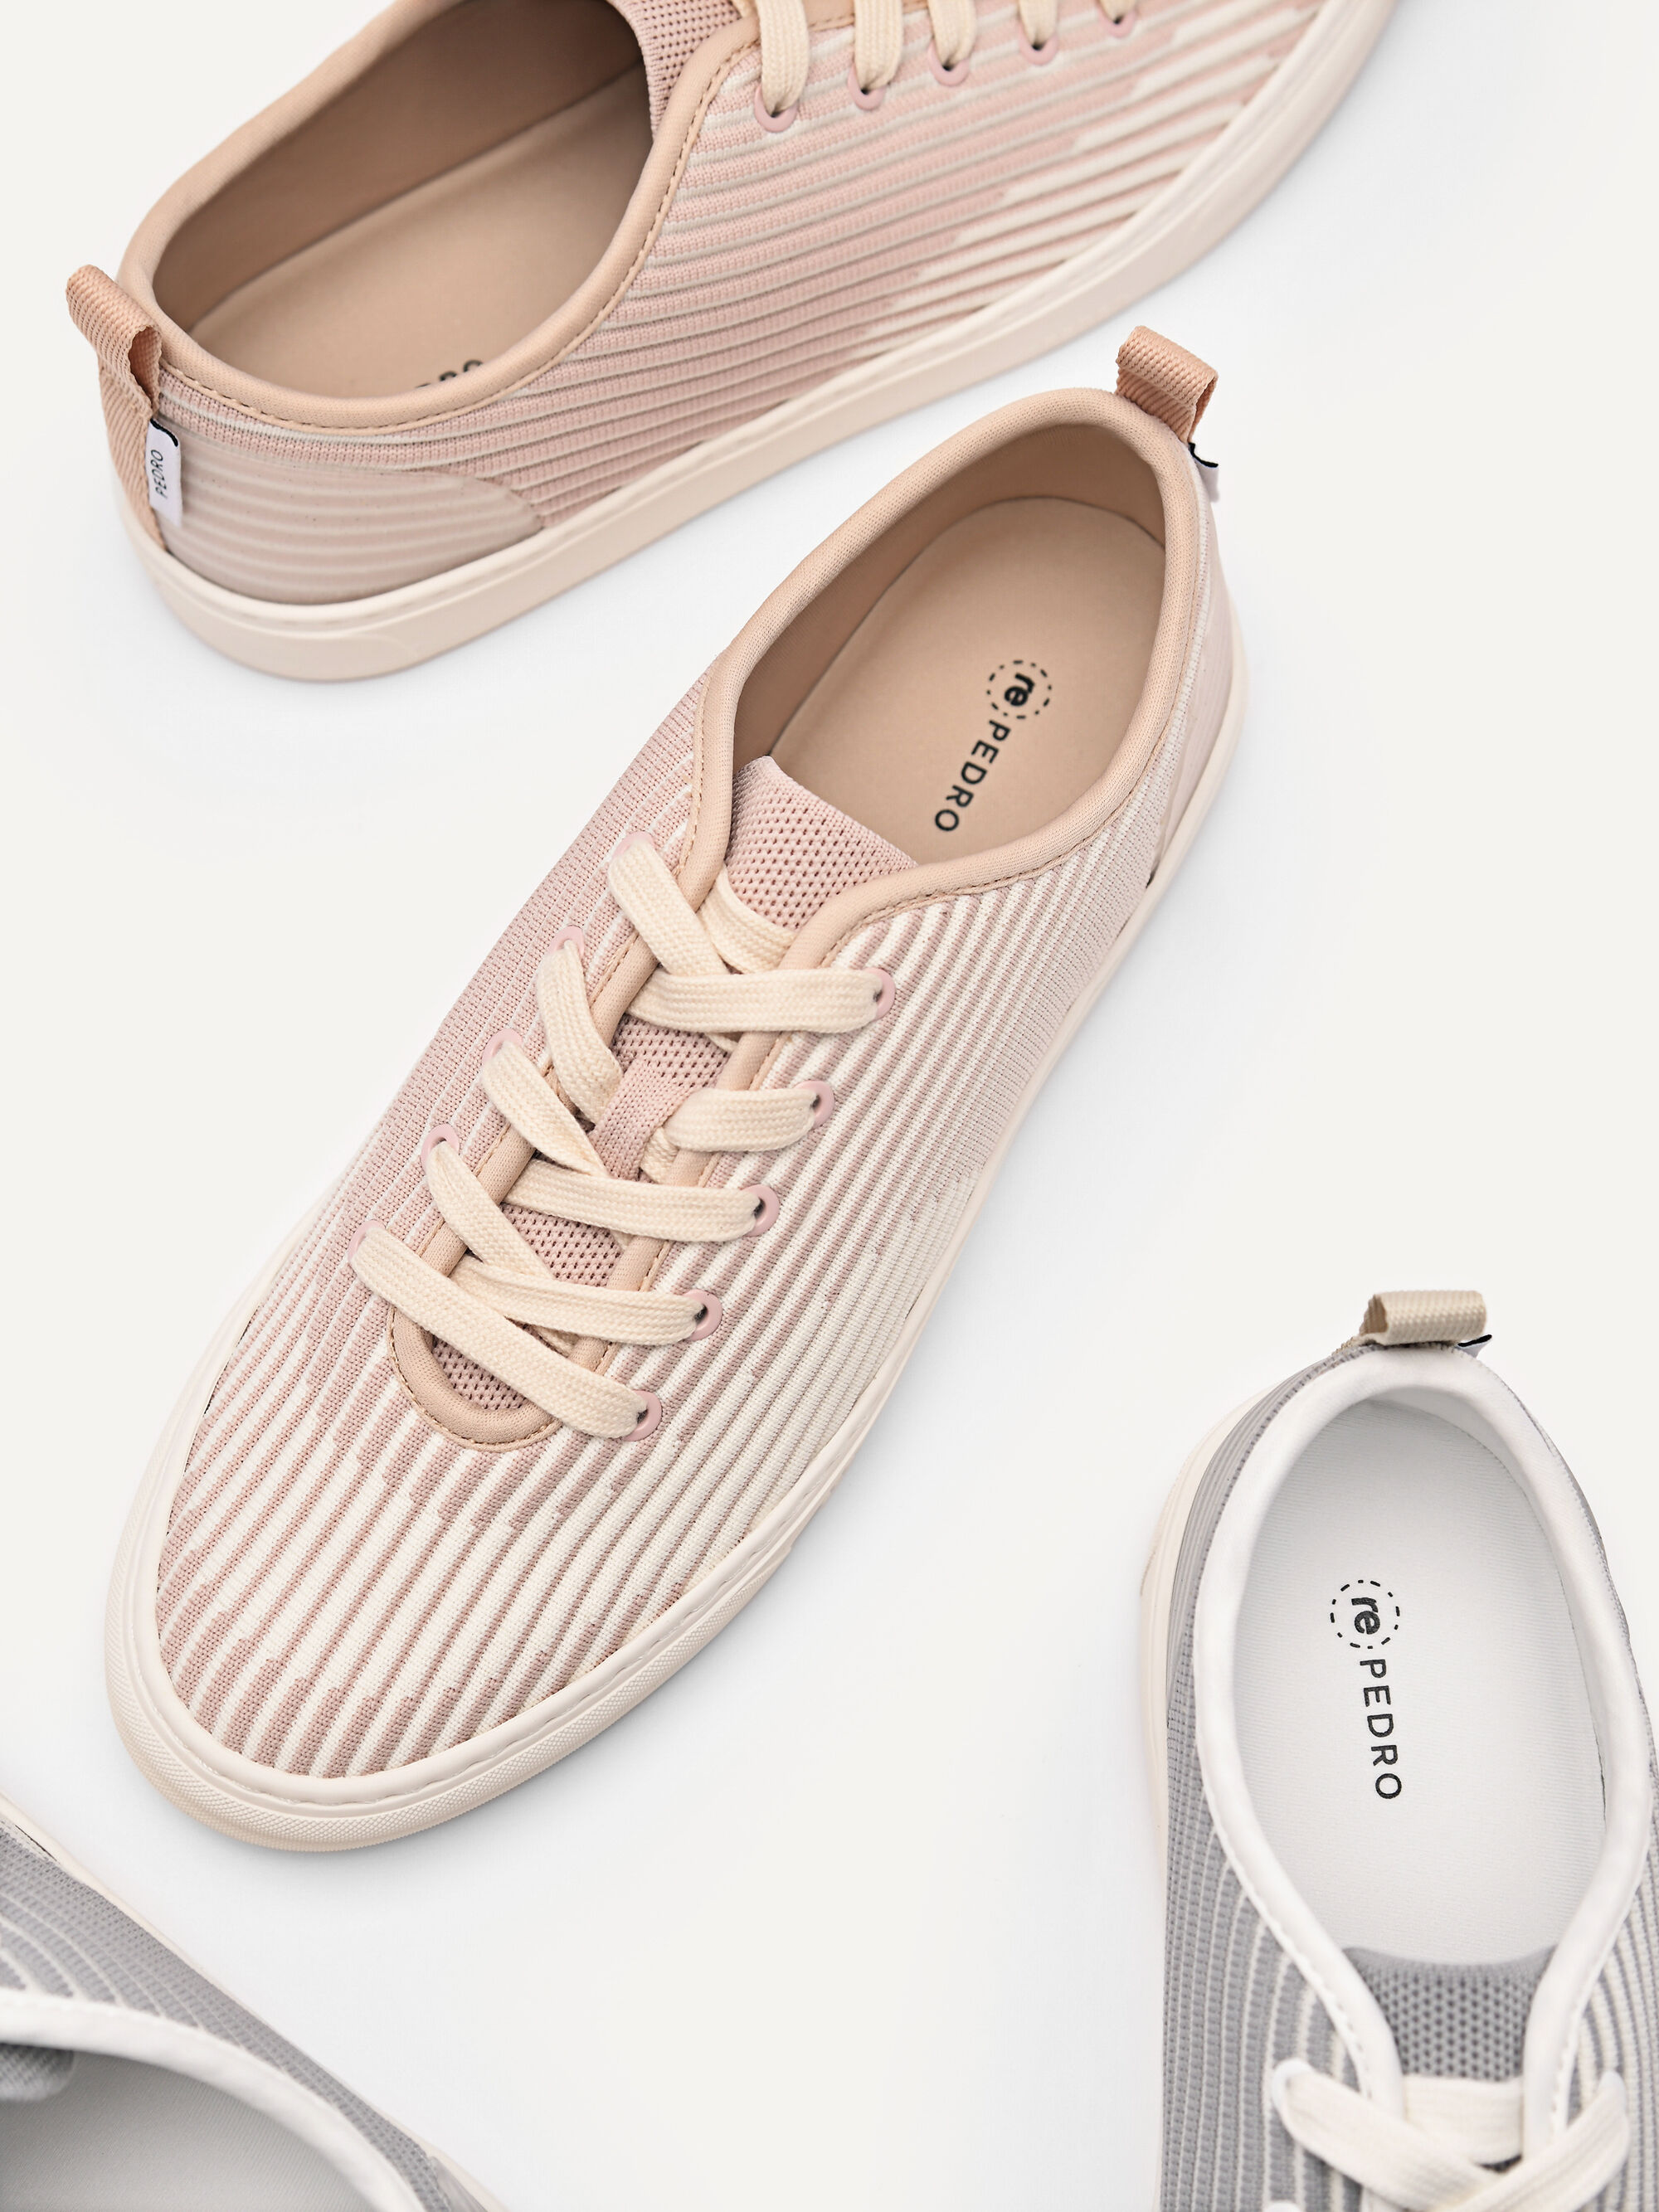 rePEDRO Pleated Court Sneakers, Nude